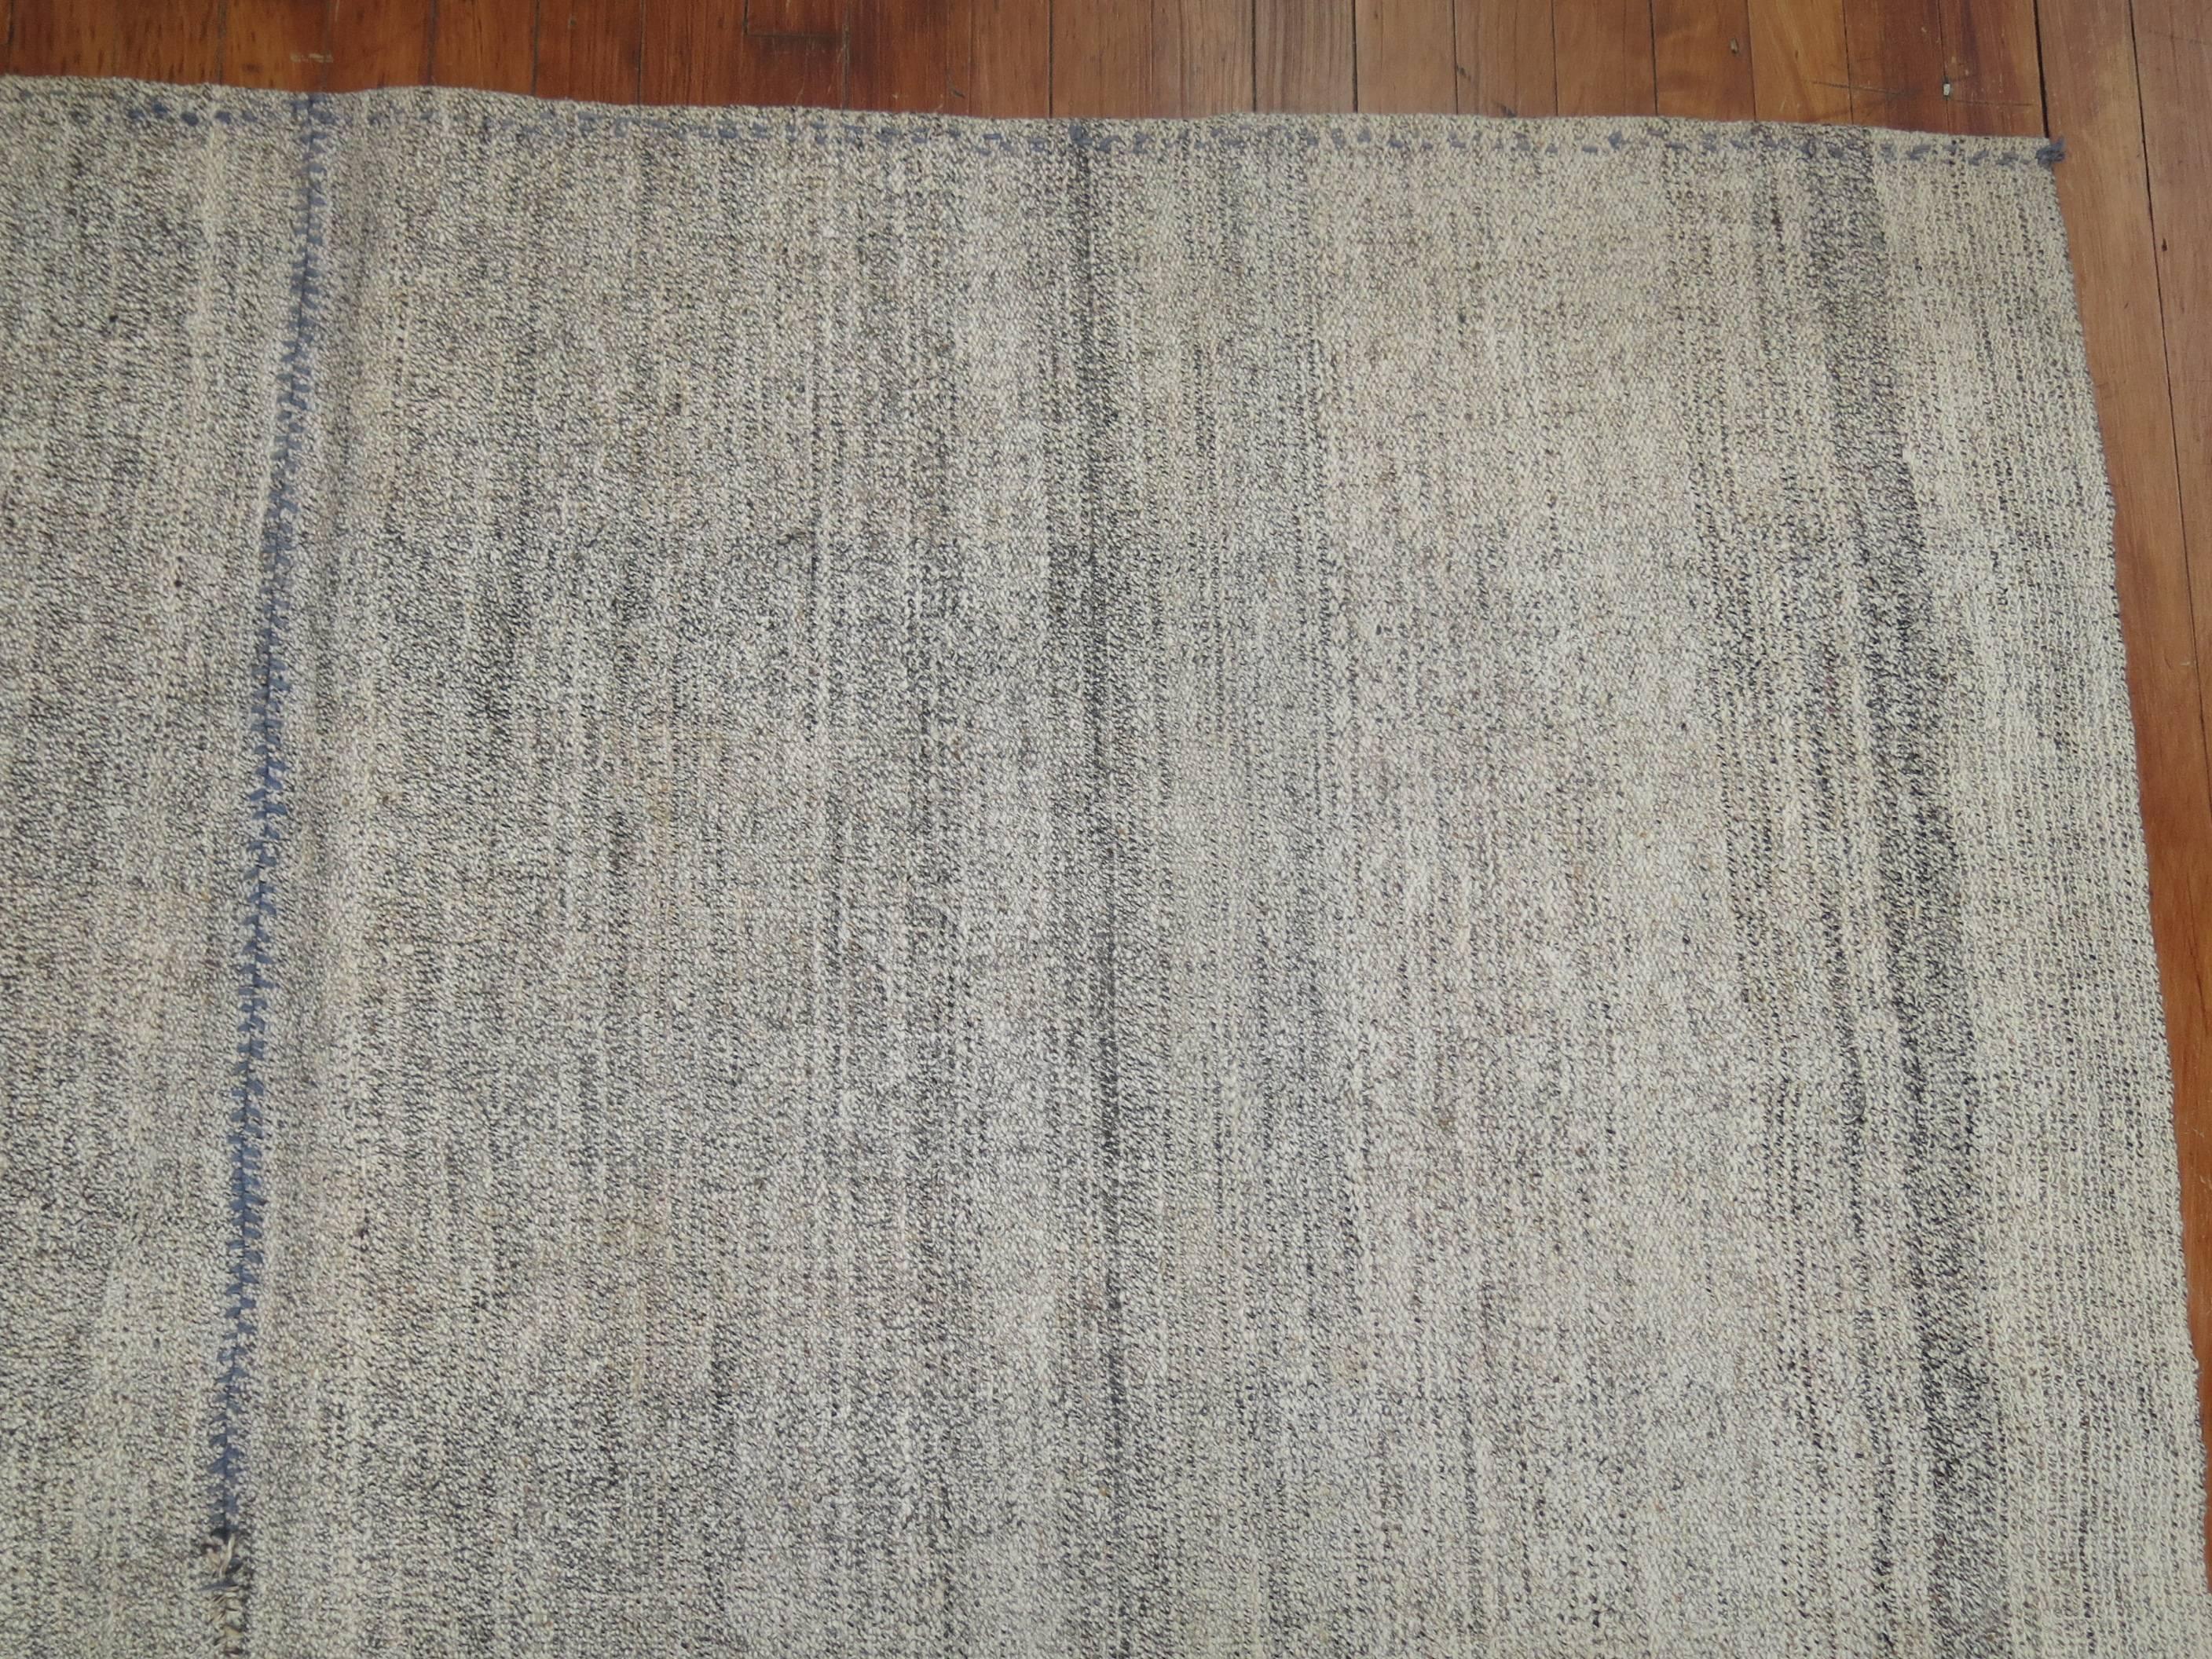 One of a kind handwoven Turkish Kilim.

Measures: 6'8